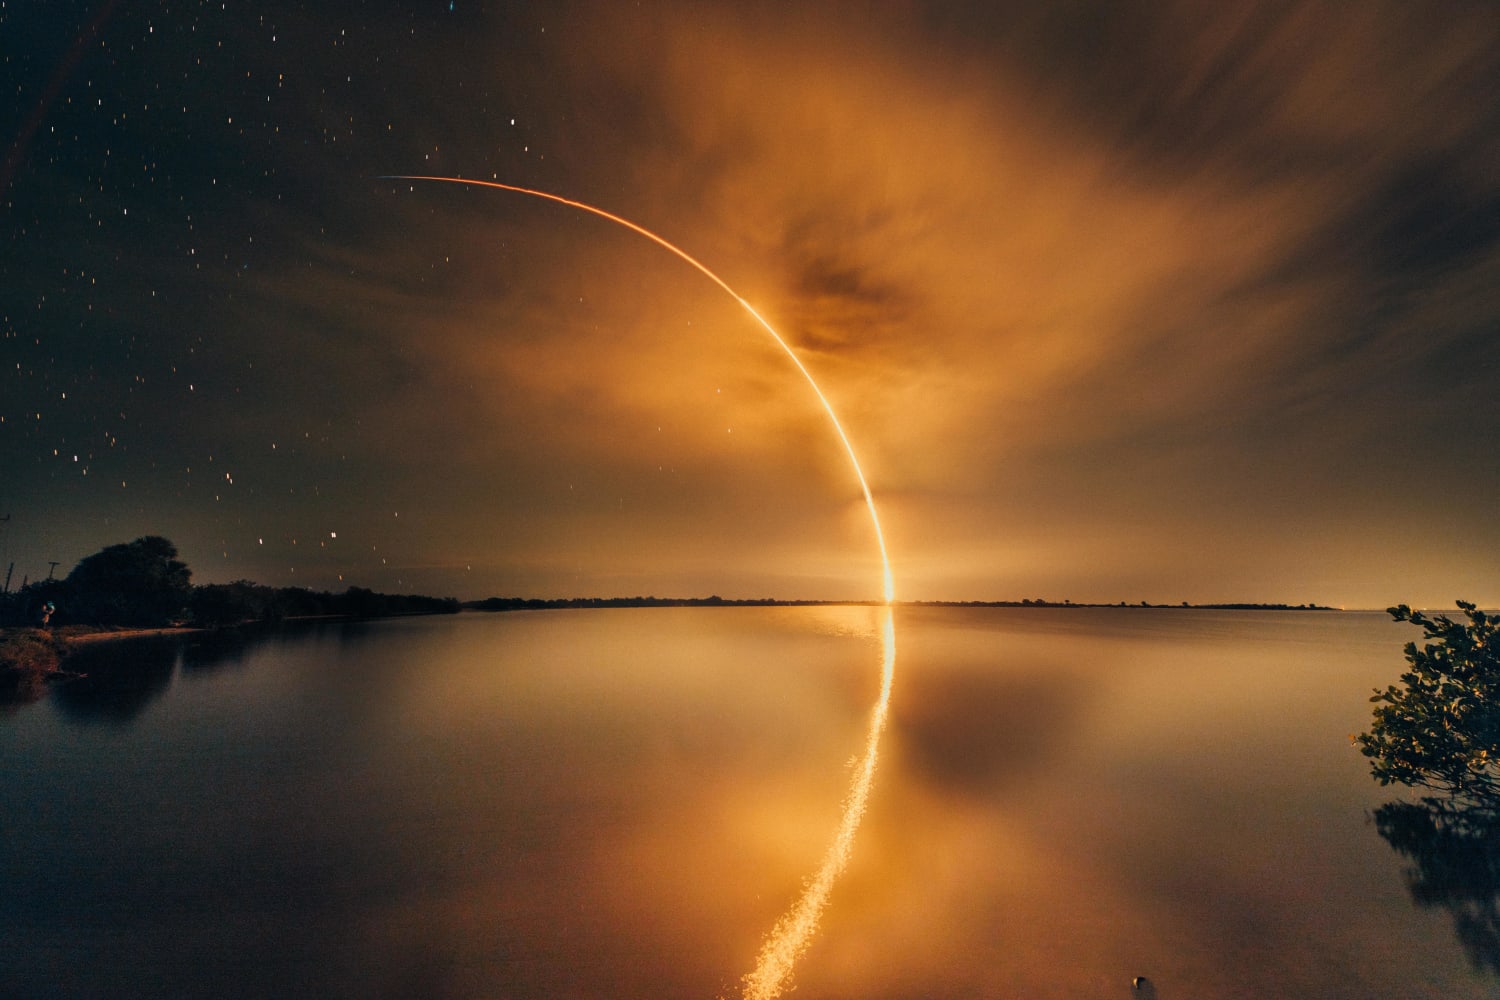 ITAP of a SpaceX rocket launch.